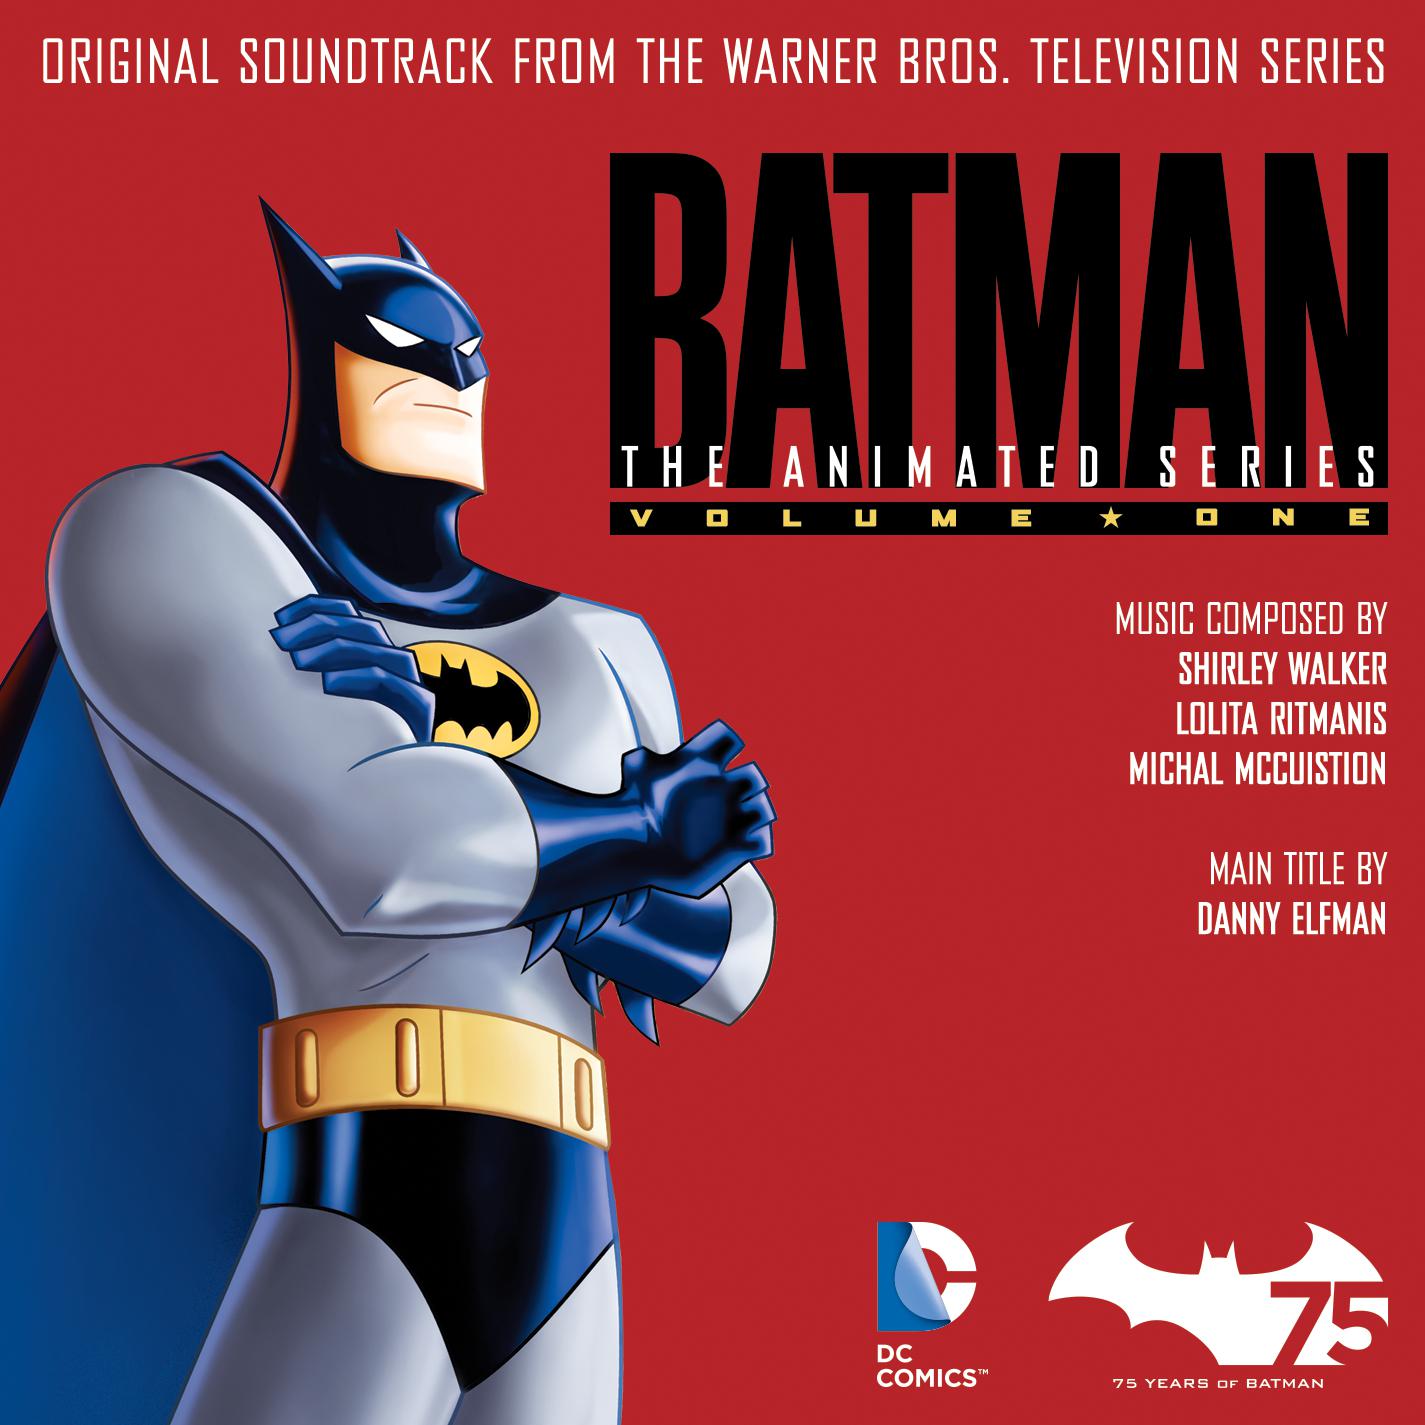 Batman: The Animated Series (Original Soundtrack from the Warner Bros. Television Series), Vol. 1